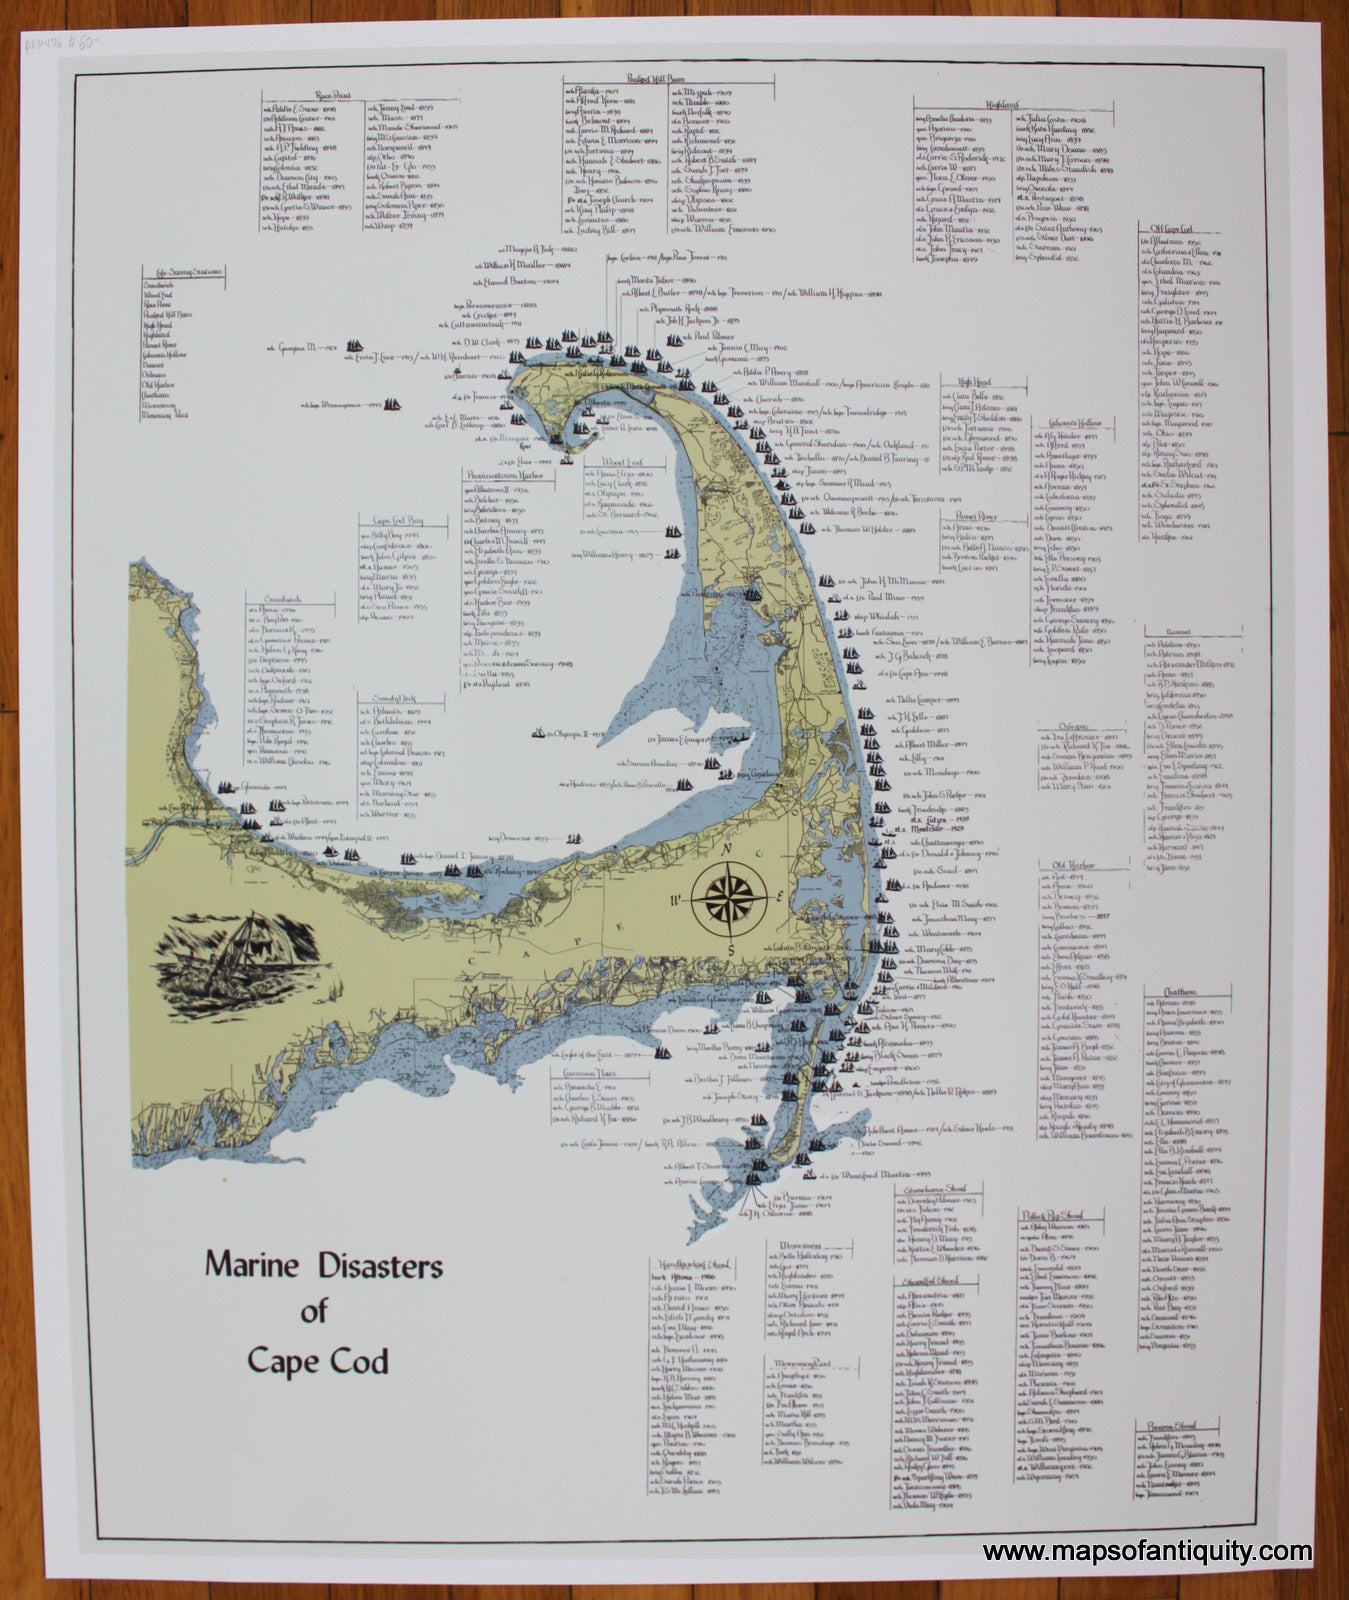 Print-Prints-Reproduction-Reproductions-Map-Marine-Disasters-of-Cape-Cod-Shipwreck-Shipwrecks-Nautical-History-Maps-of-Antiquity